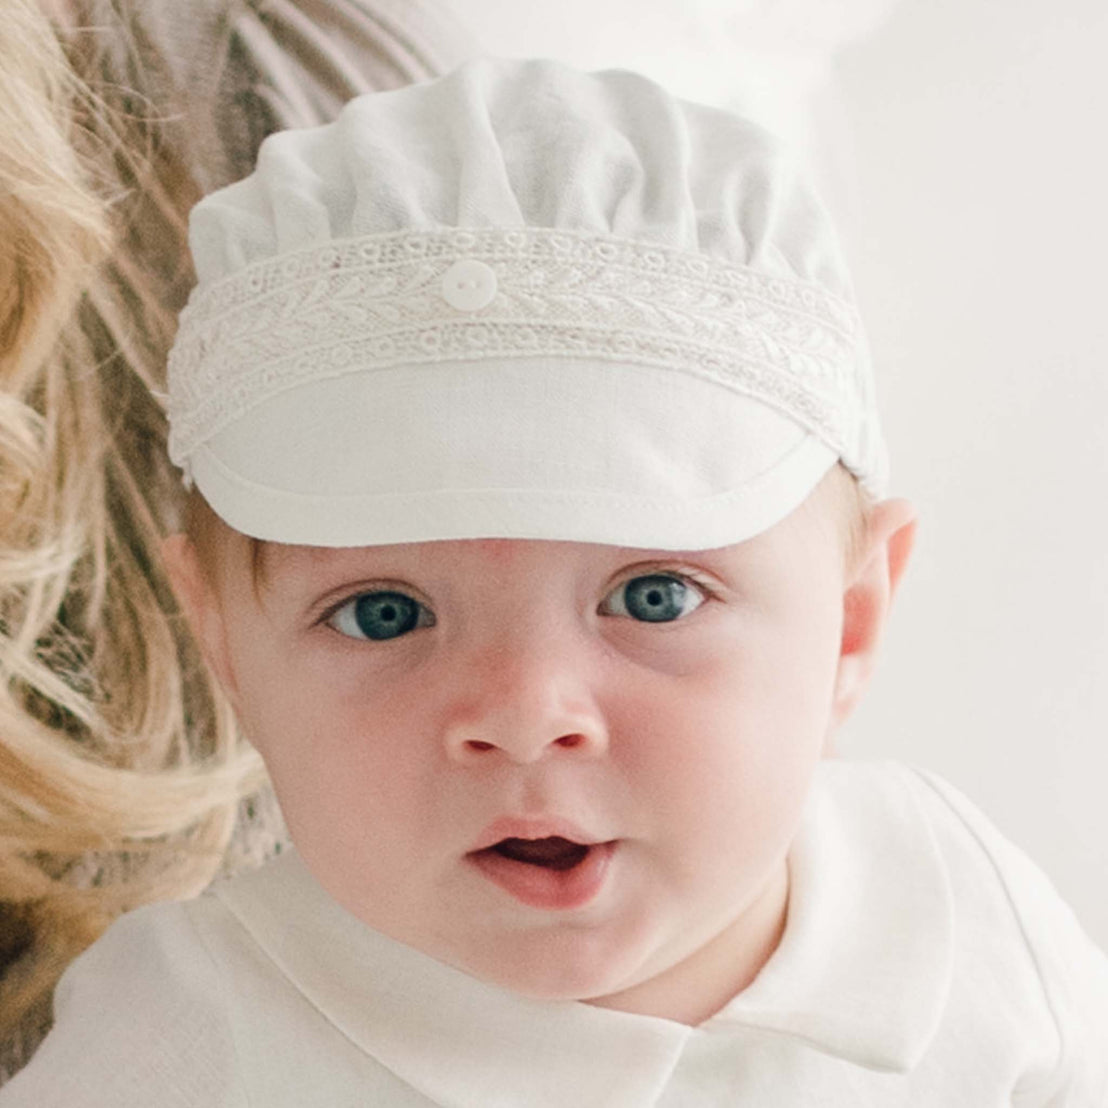 A baby wearing an Oliver Linen Cap, handmade in the USA, and a matching white shirt looks directly at the camera with blue eyes and a slight open-mouthed expression. Blond hair of an adult is partially visible on the left side of the image.